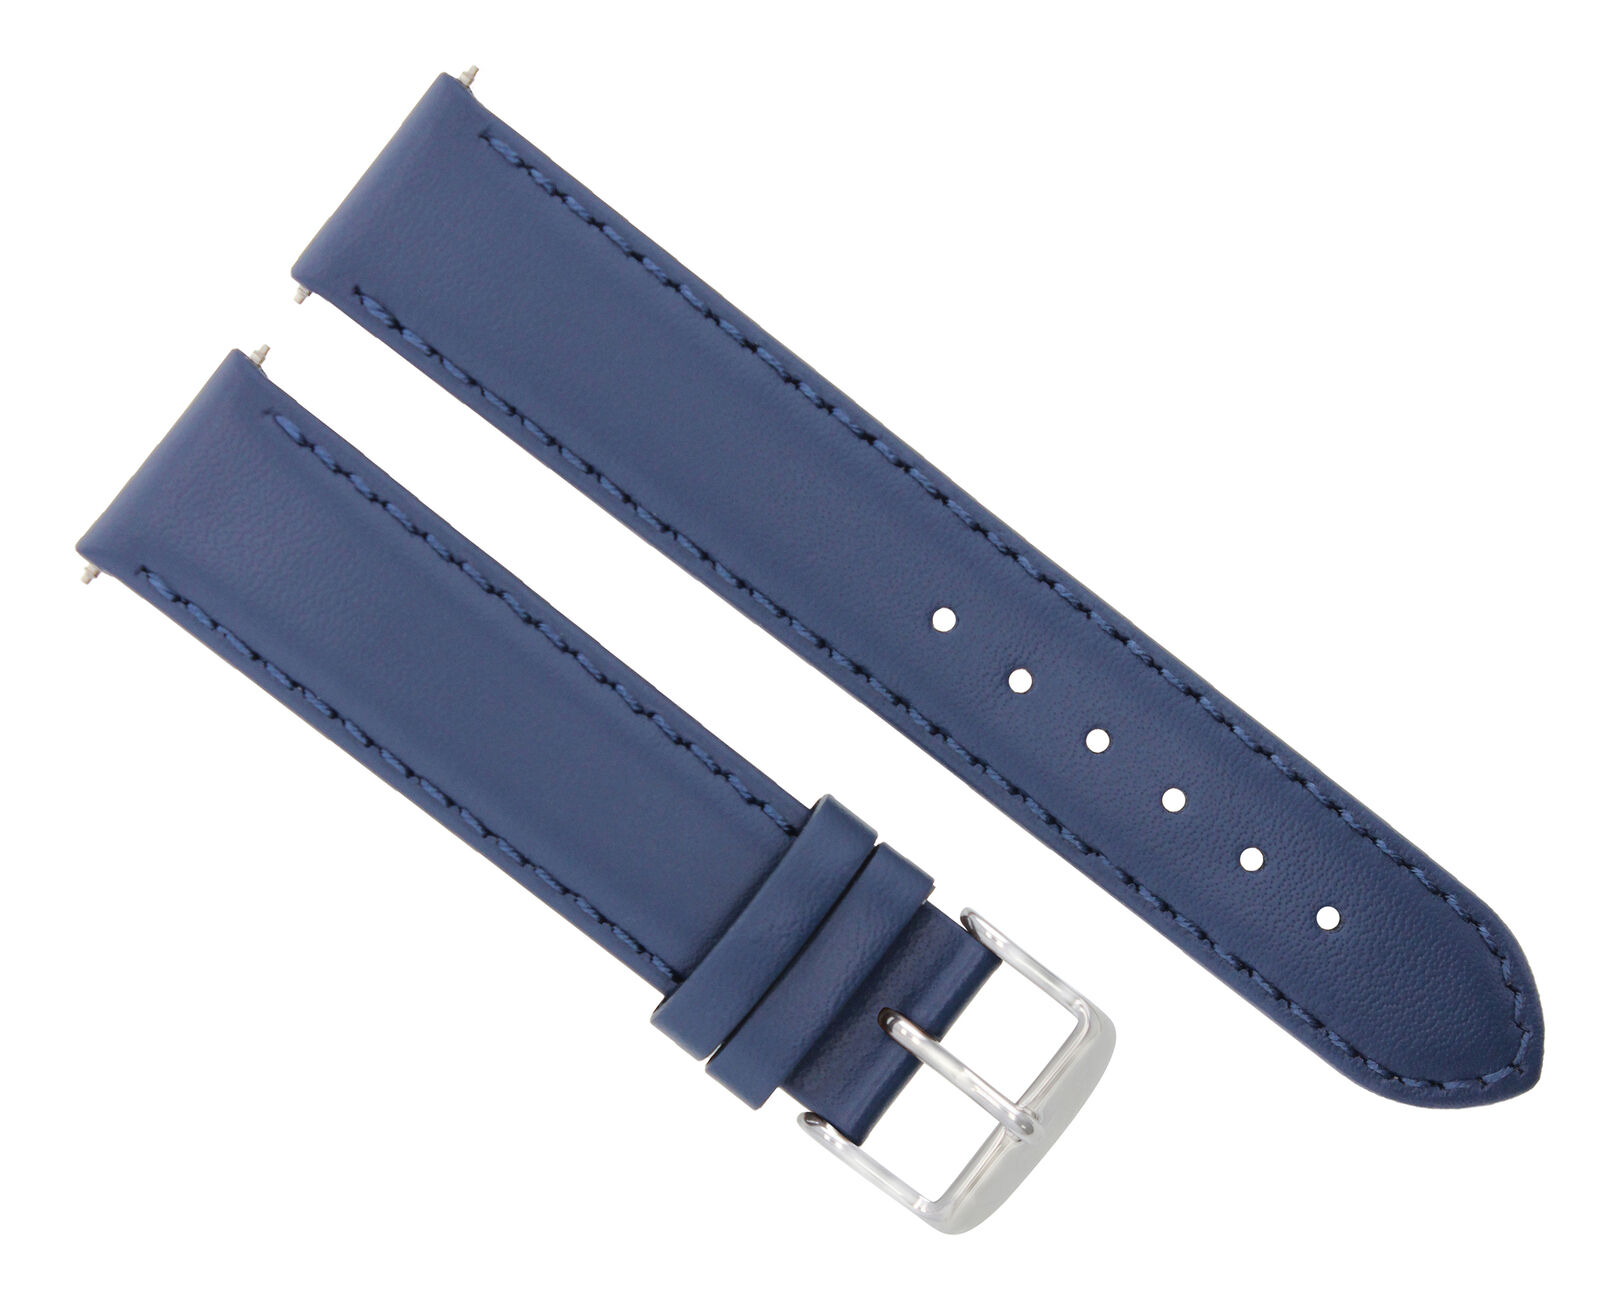 20MM SMOOTH LEATHER WATCH BAND STRAP FOR RAYMOND WEIL TANGO 5590 WATCH BLUE